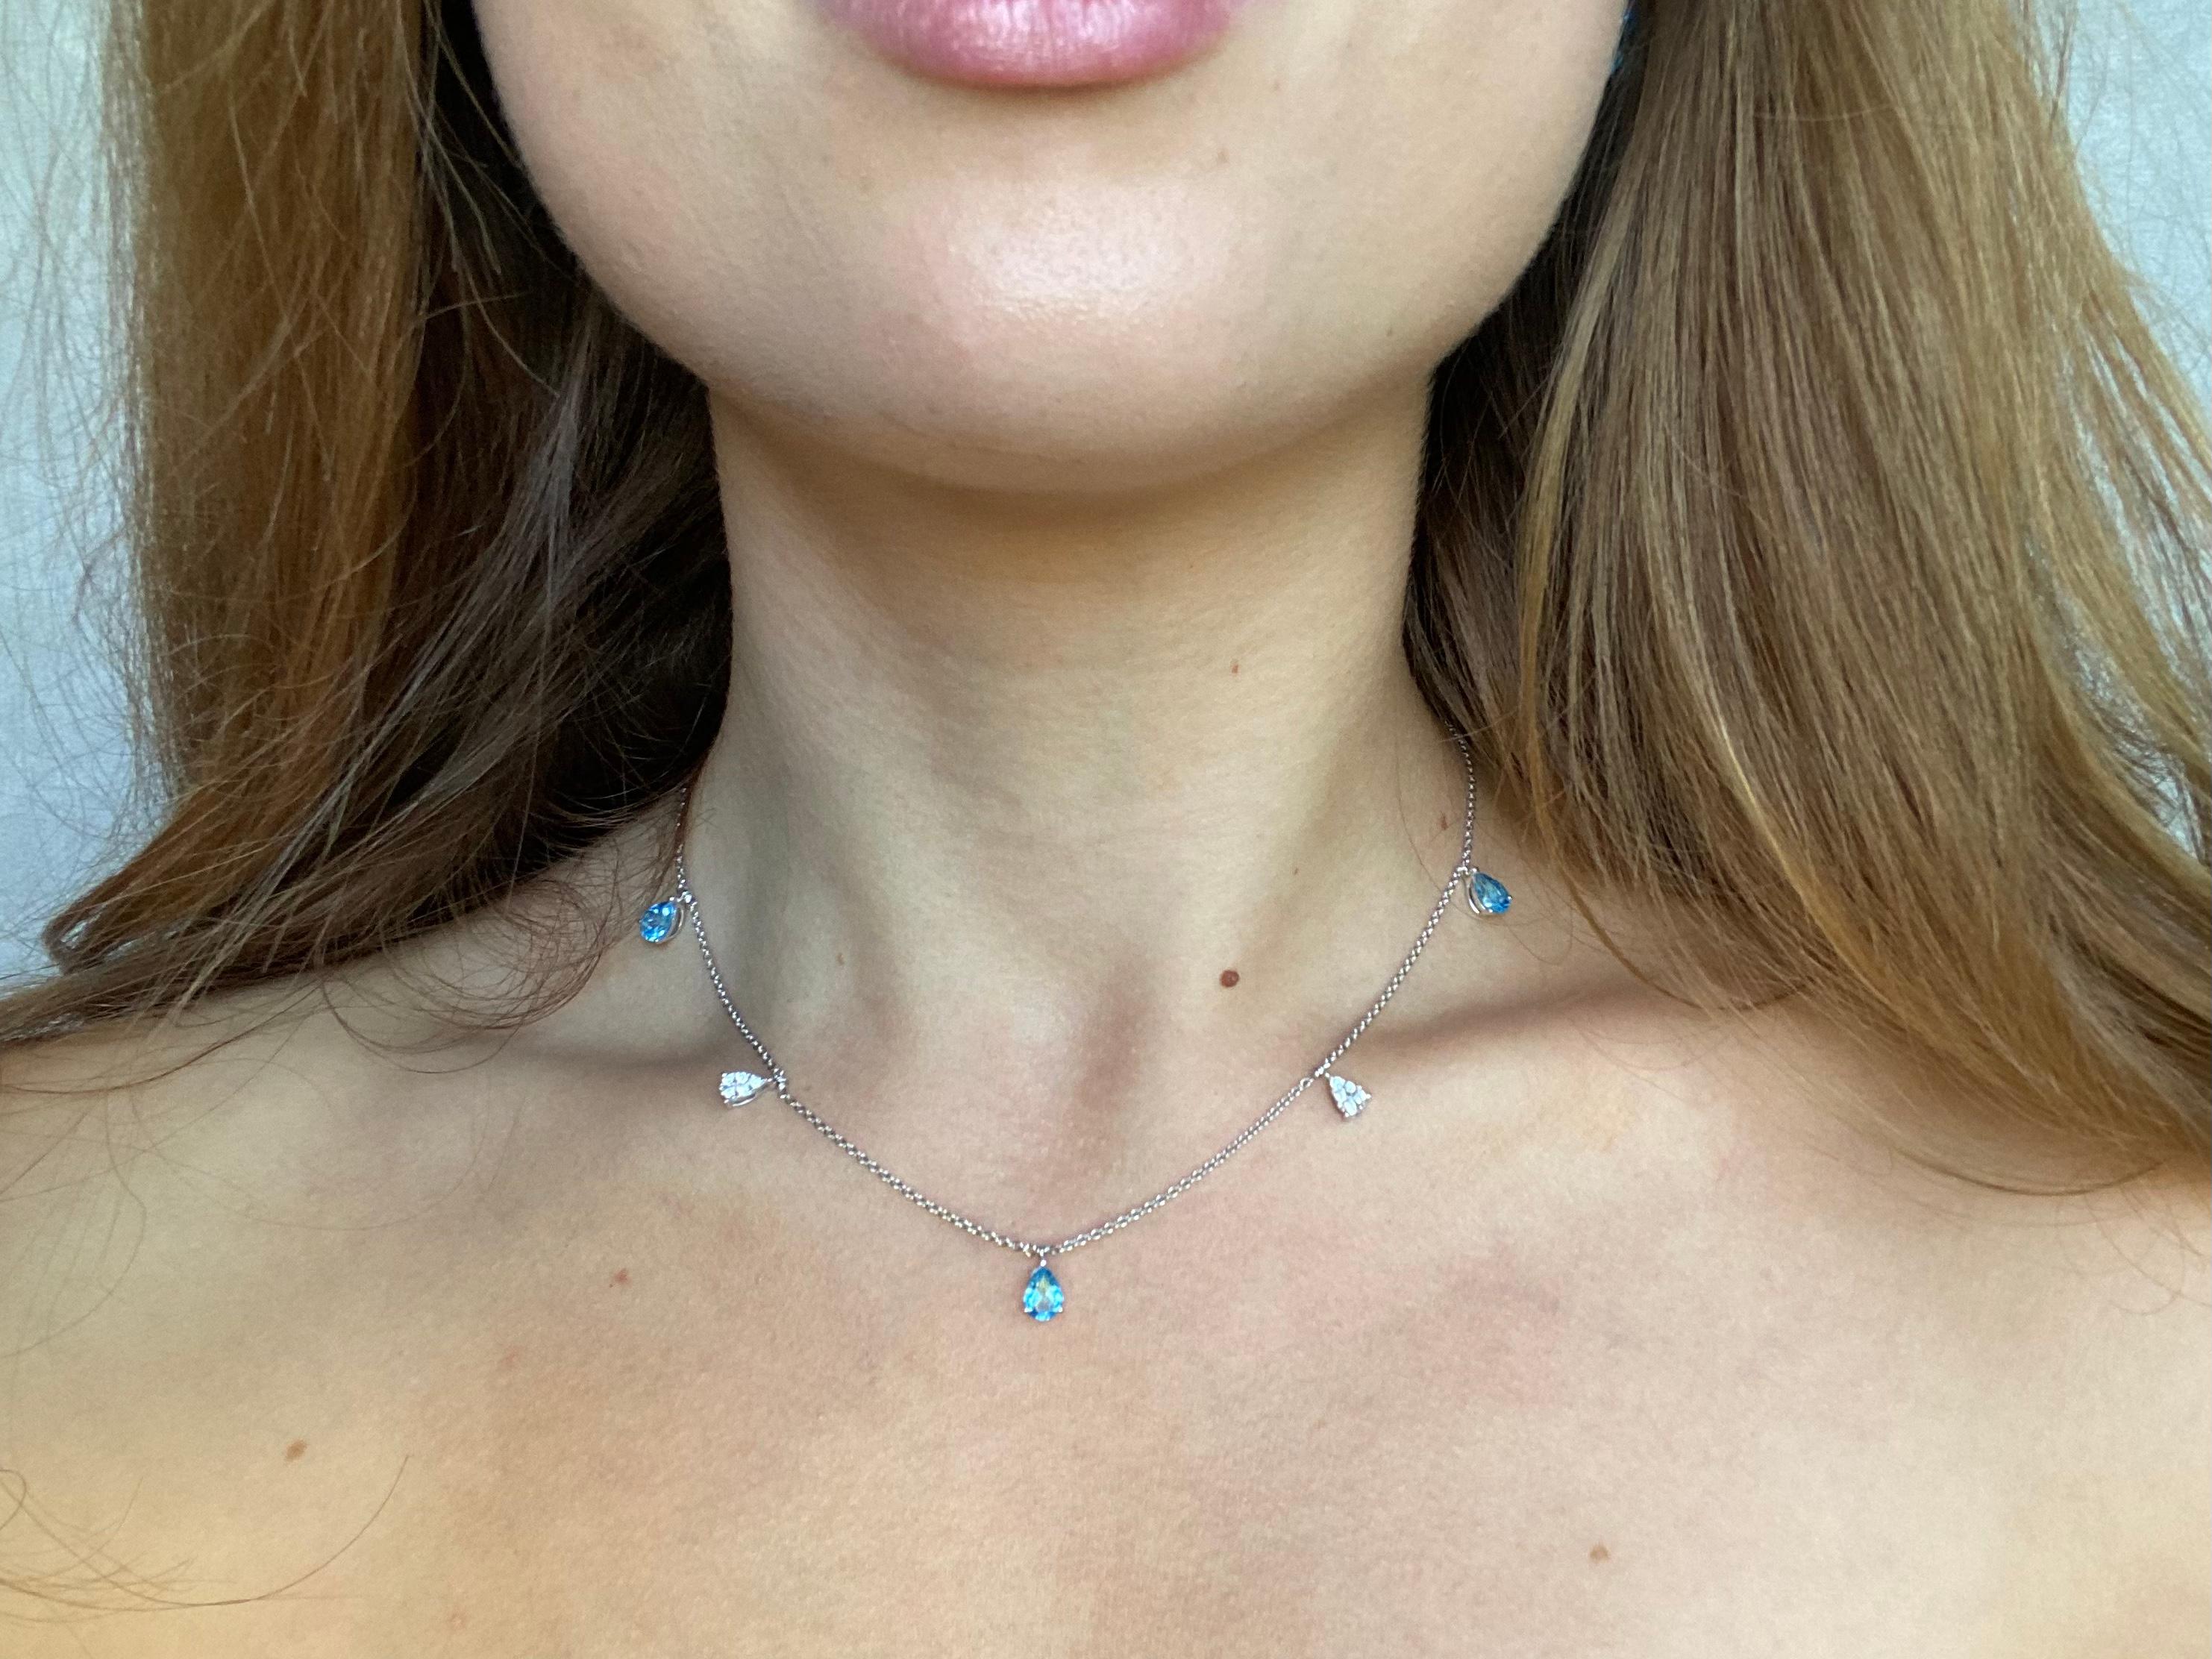 This blue topaz diamond chocker necklace is perfect for all of you who love delicate designs. The 3 drop shaped blue topaz bring to mind images of luxurious landscapes of French Riviera or Maldives blue water. The Swiss blue hue has a noble